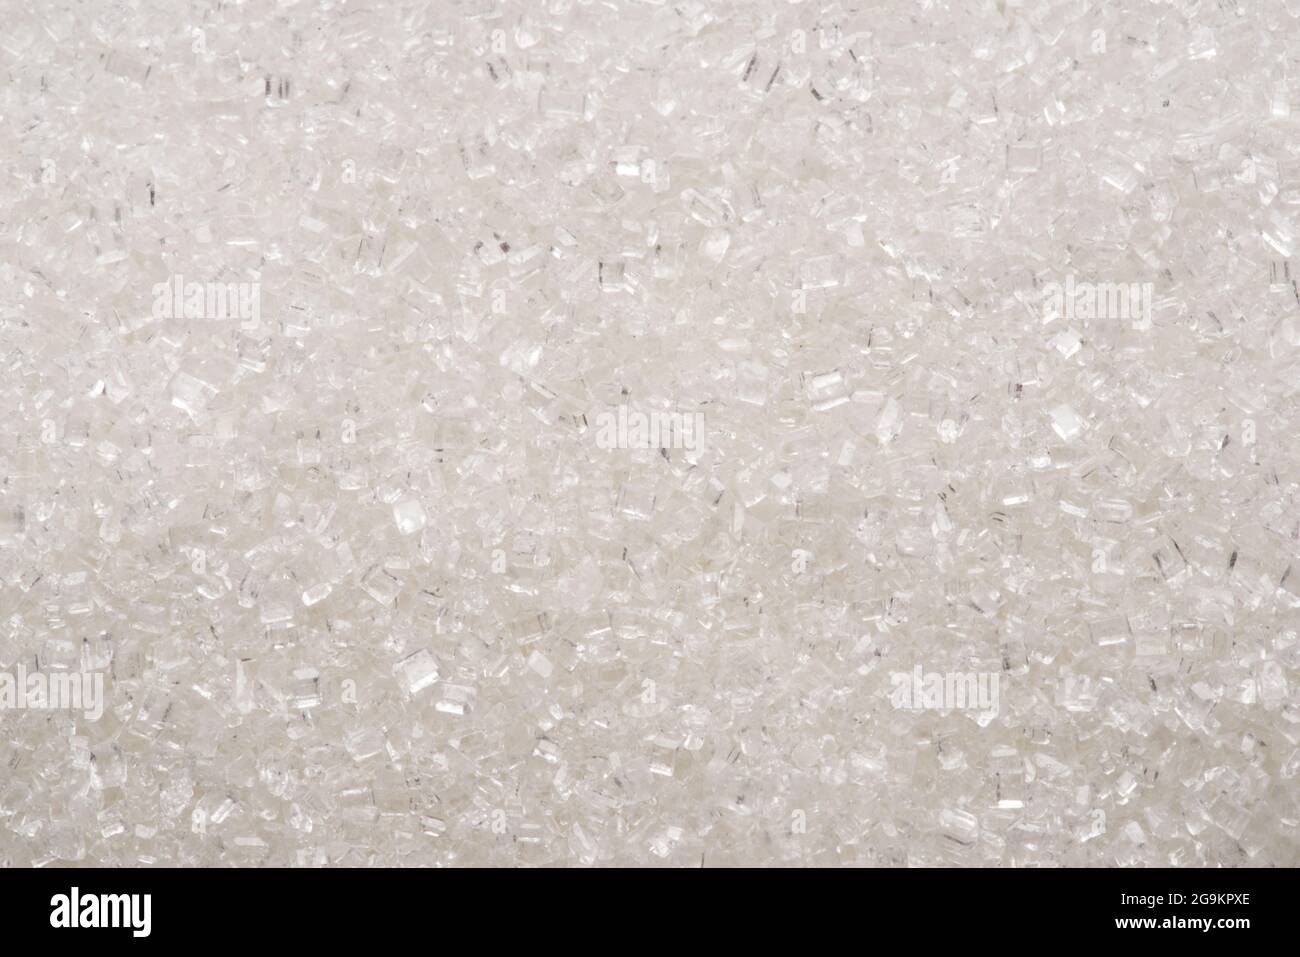 White refined sugar granules close-up. Food background. Stock Photo